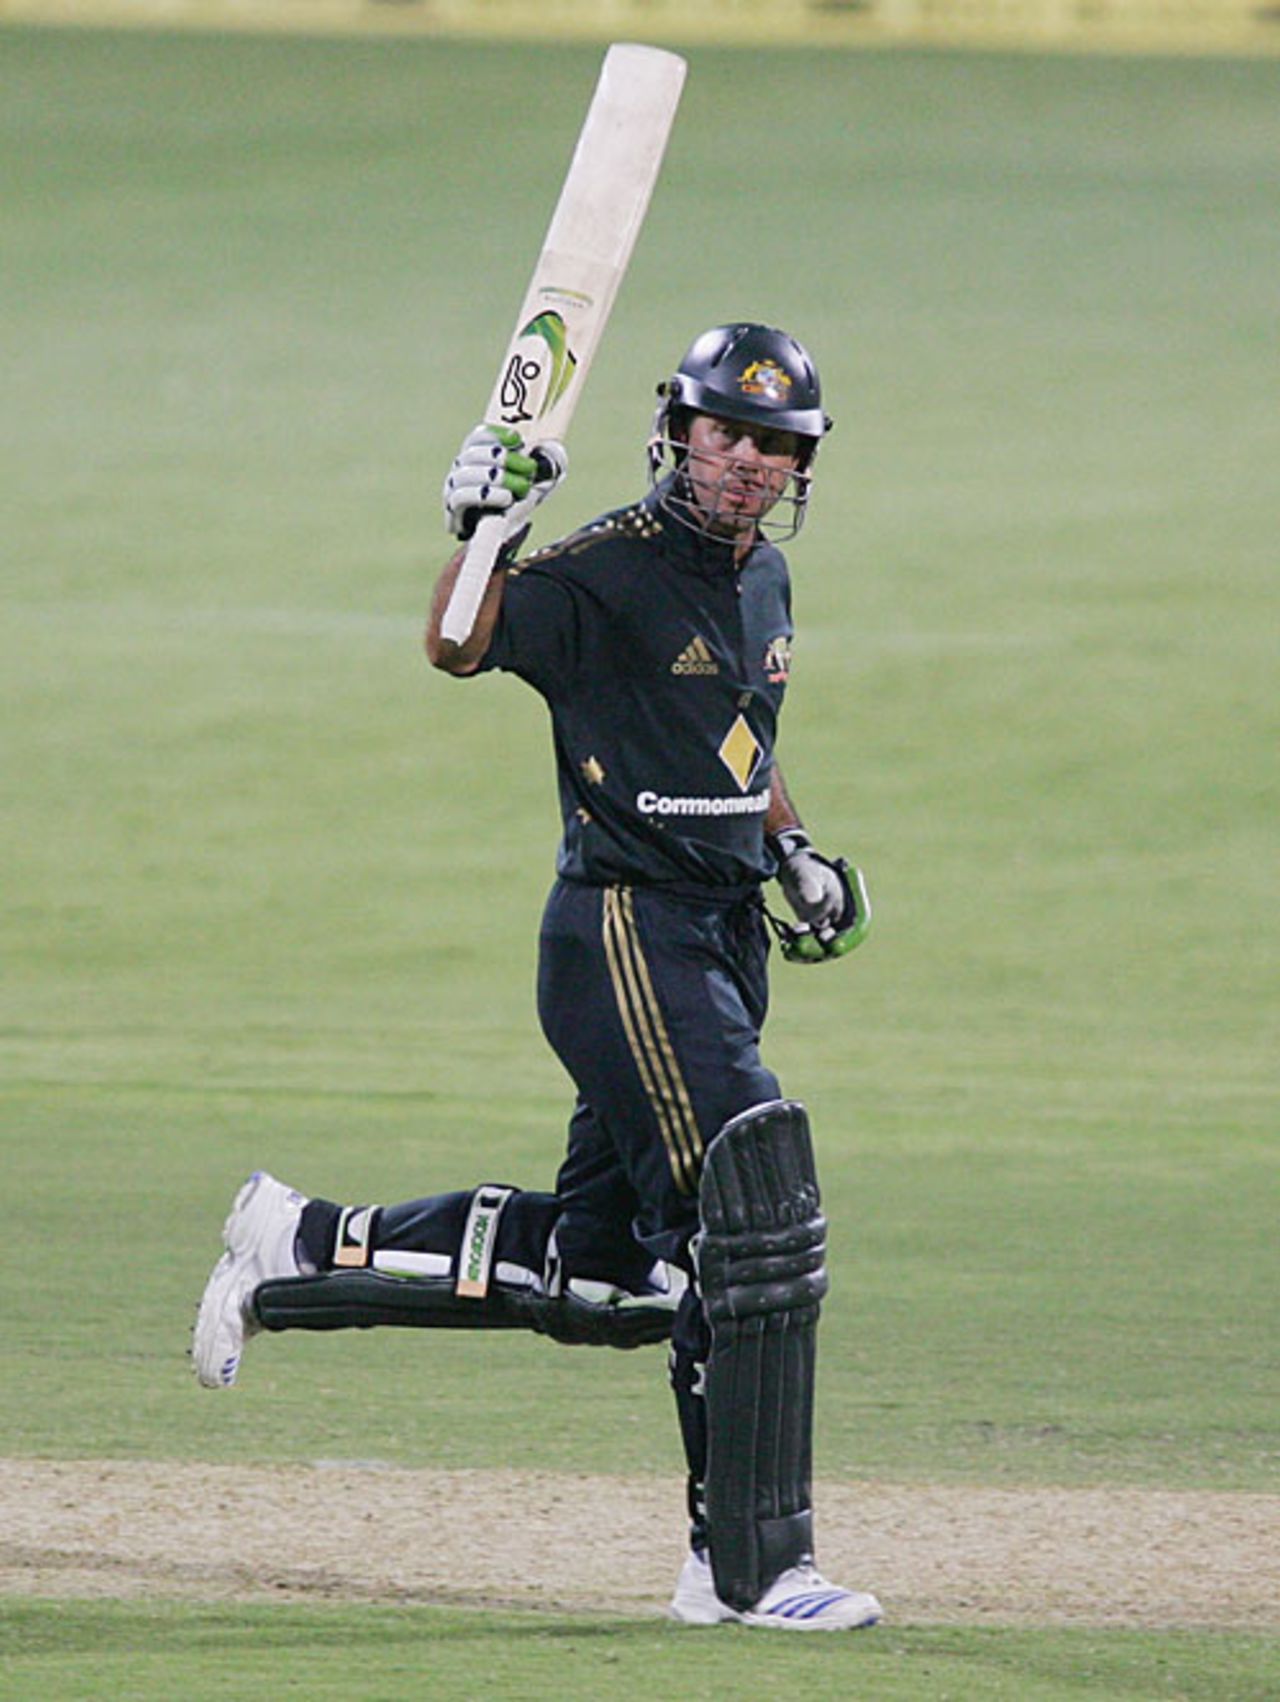 Ricky Ponting brings up his century, Australia v New Zealand, 1st ODI, Chappell-Hadlee Trophy, December 14, 2007